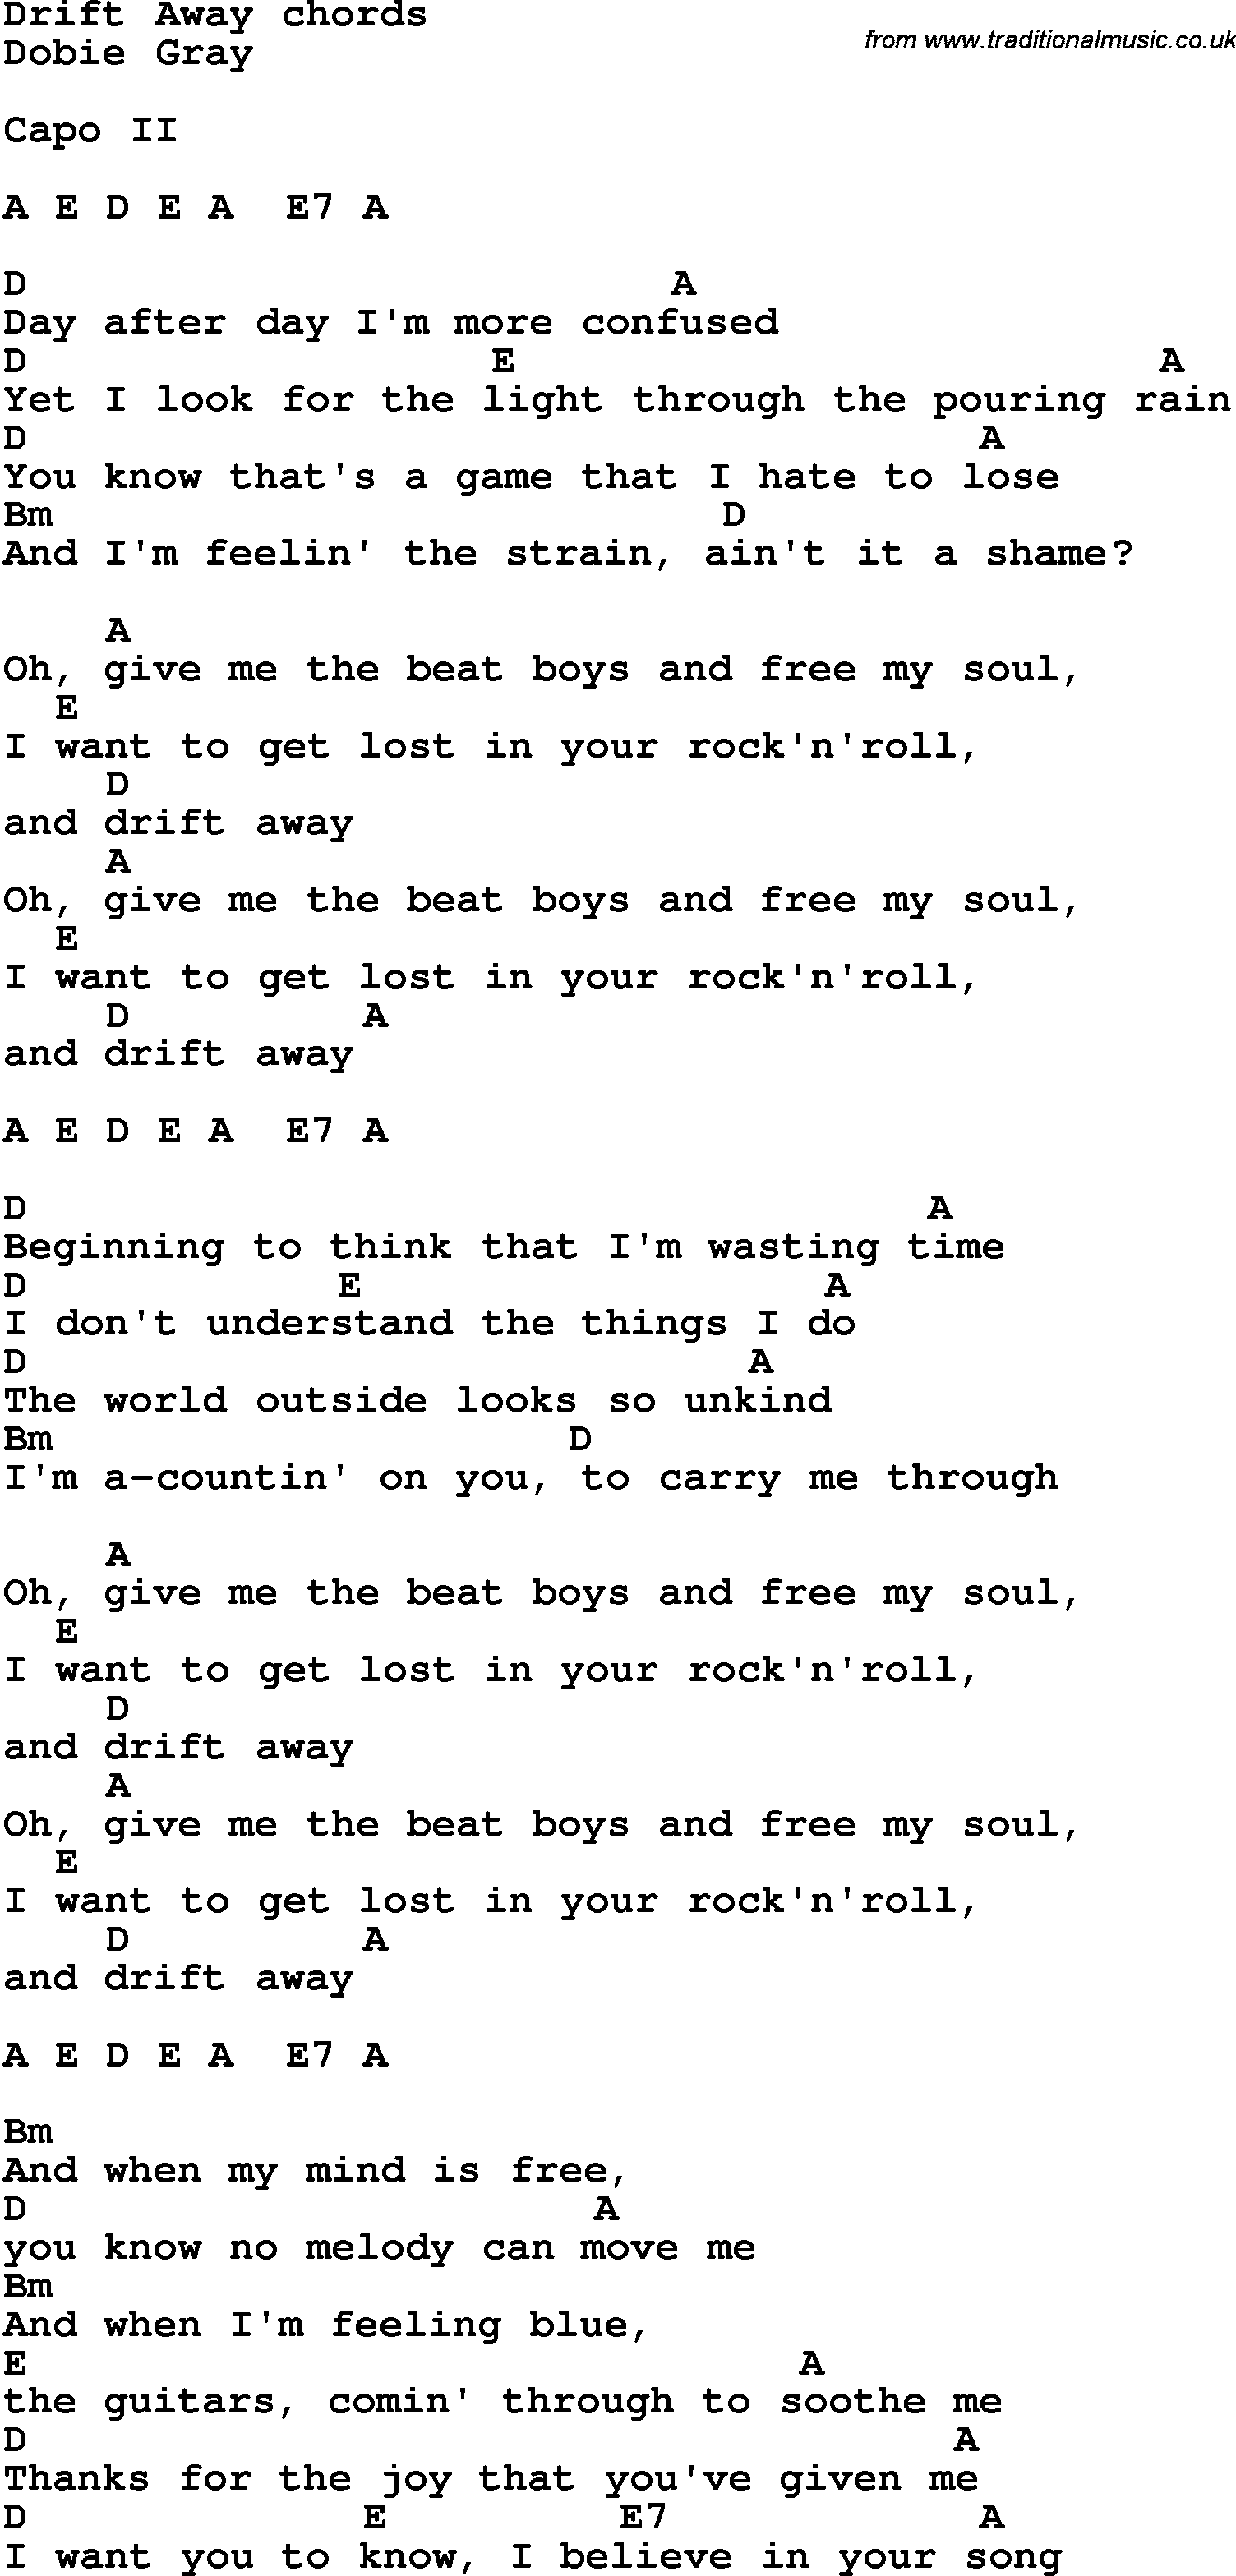 Song Lyrics with guitar chords for Drift Away